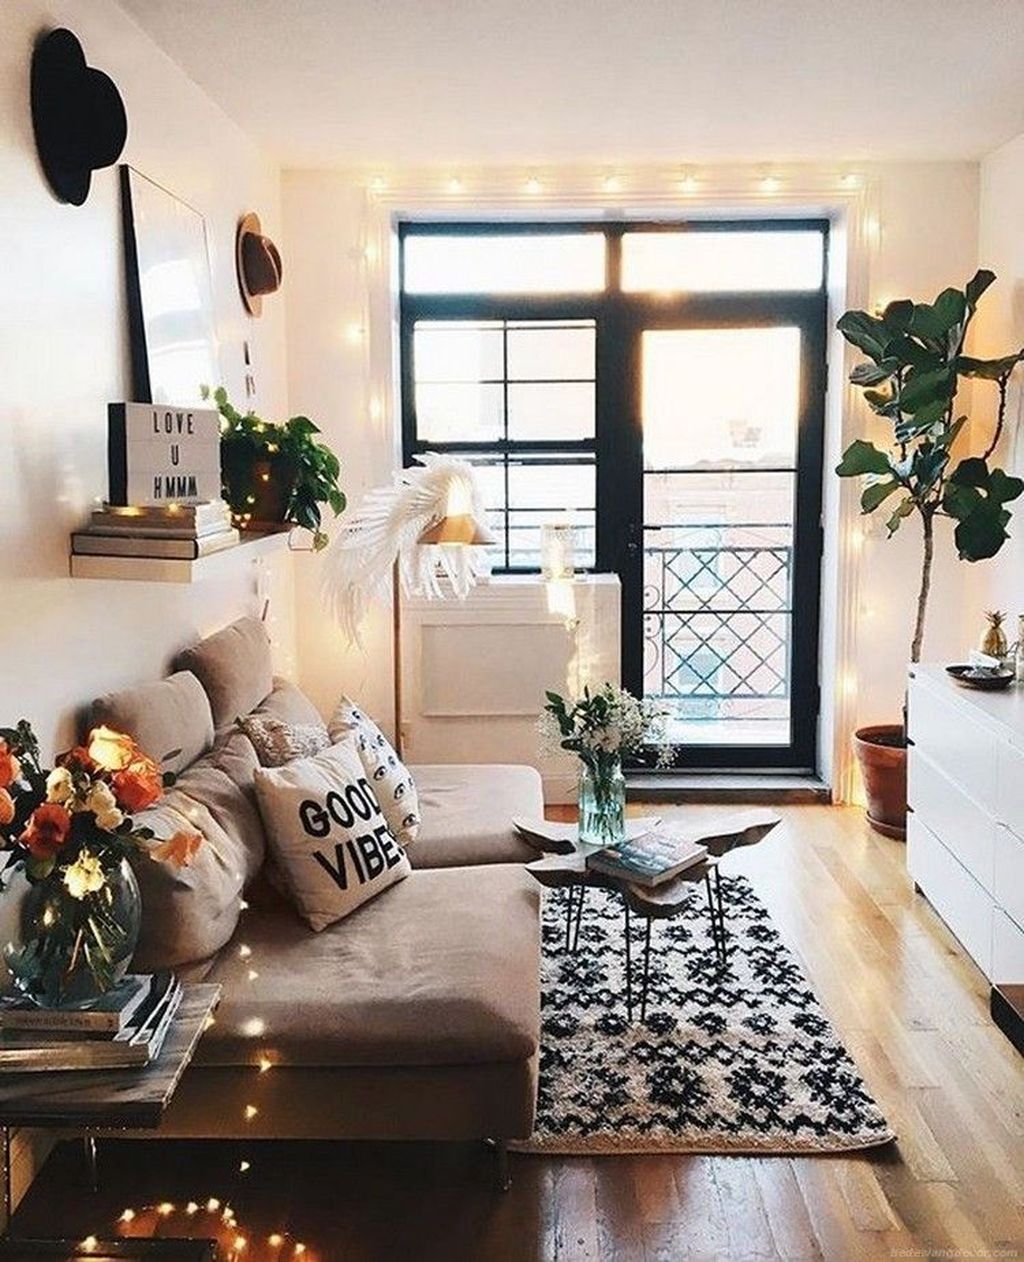 Furniture For A Bohemian inspired Space